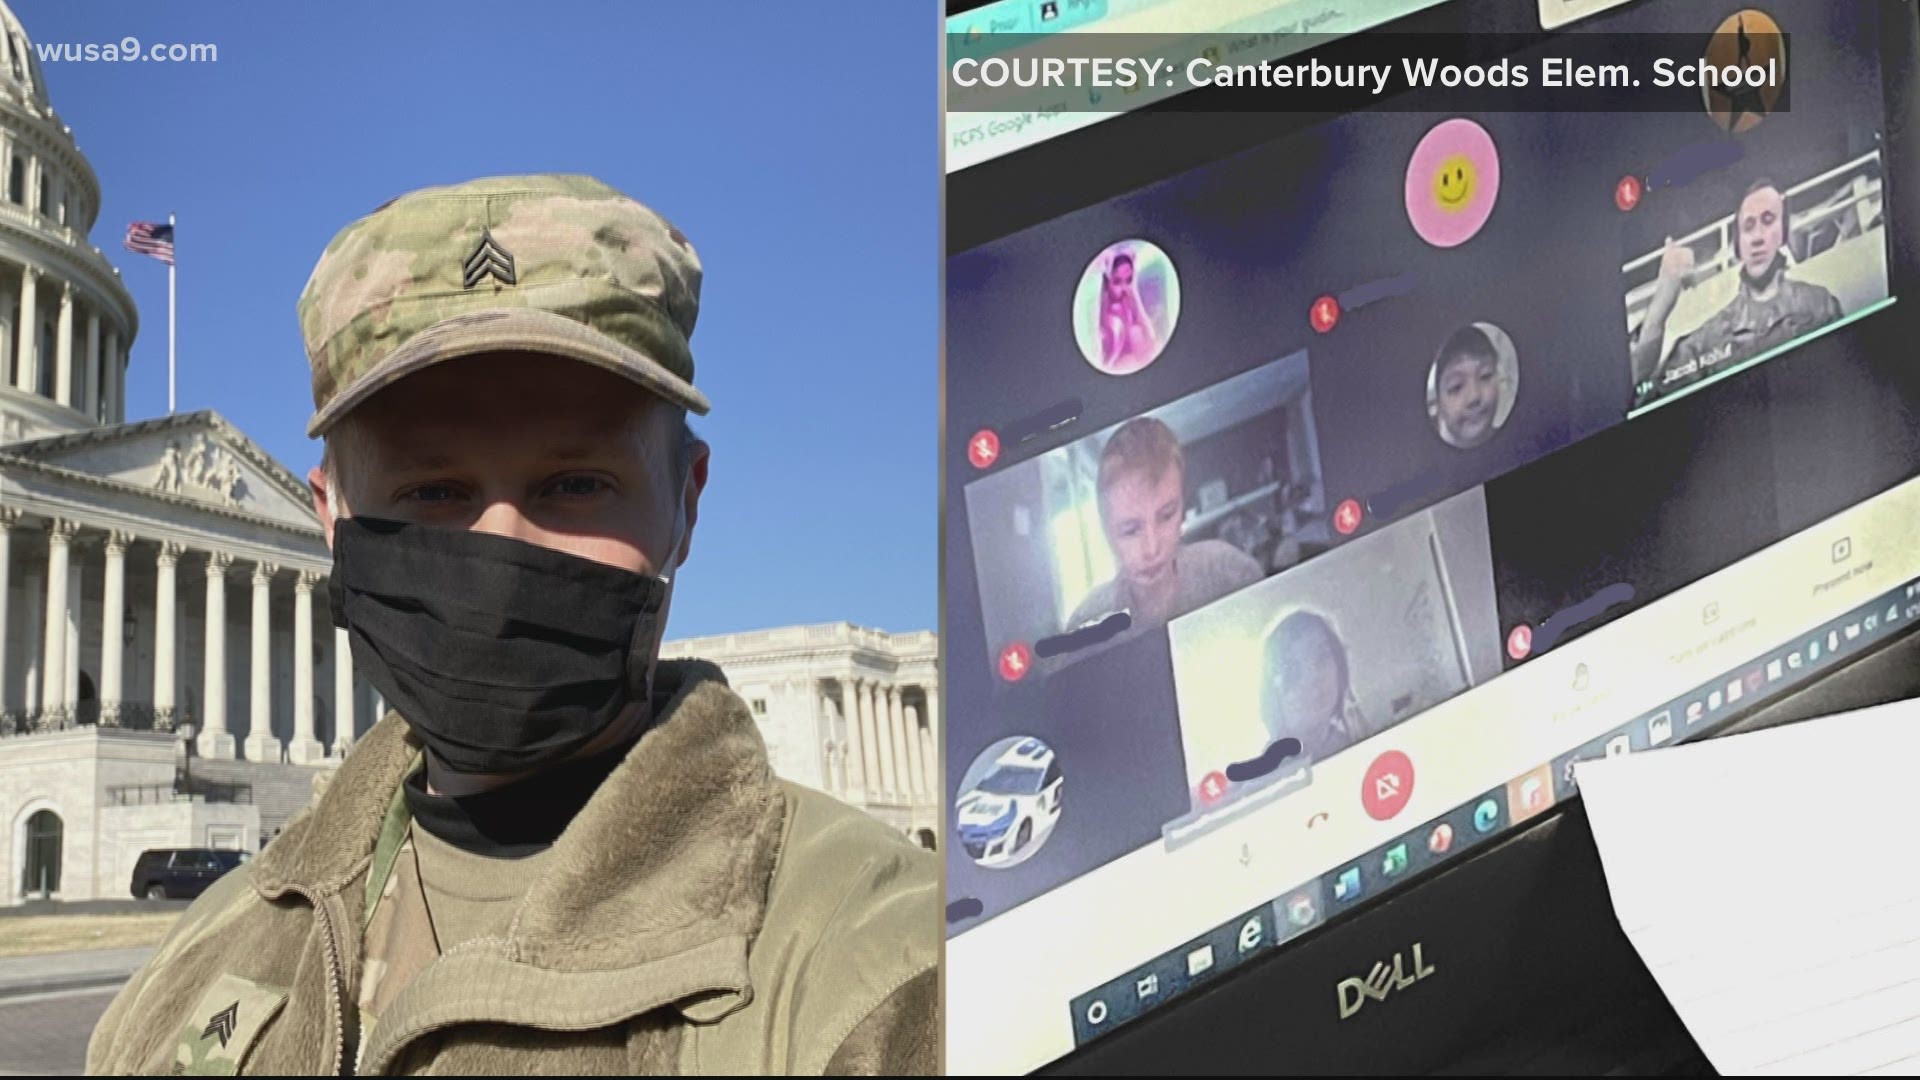 Jake Kohut is a member of the DC National Guard currently deployed to protect the Capitol before Inauguration. But he's still finding time to teach students.